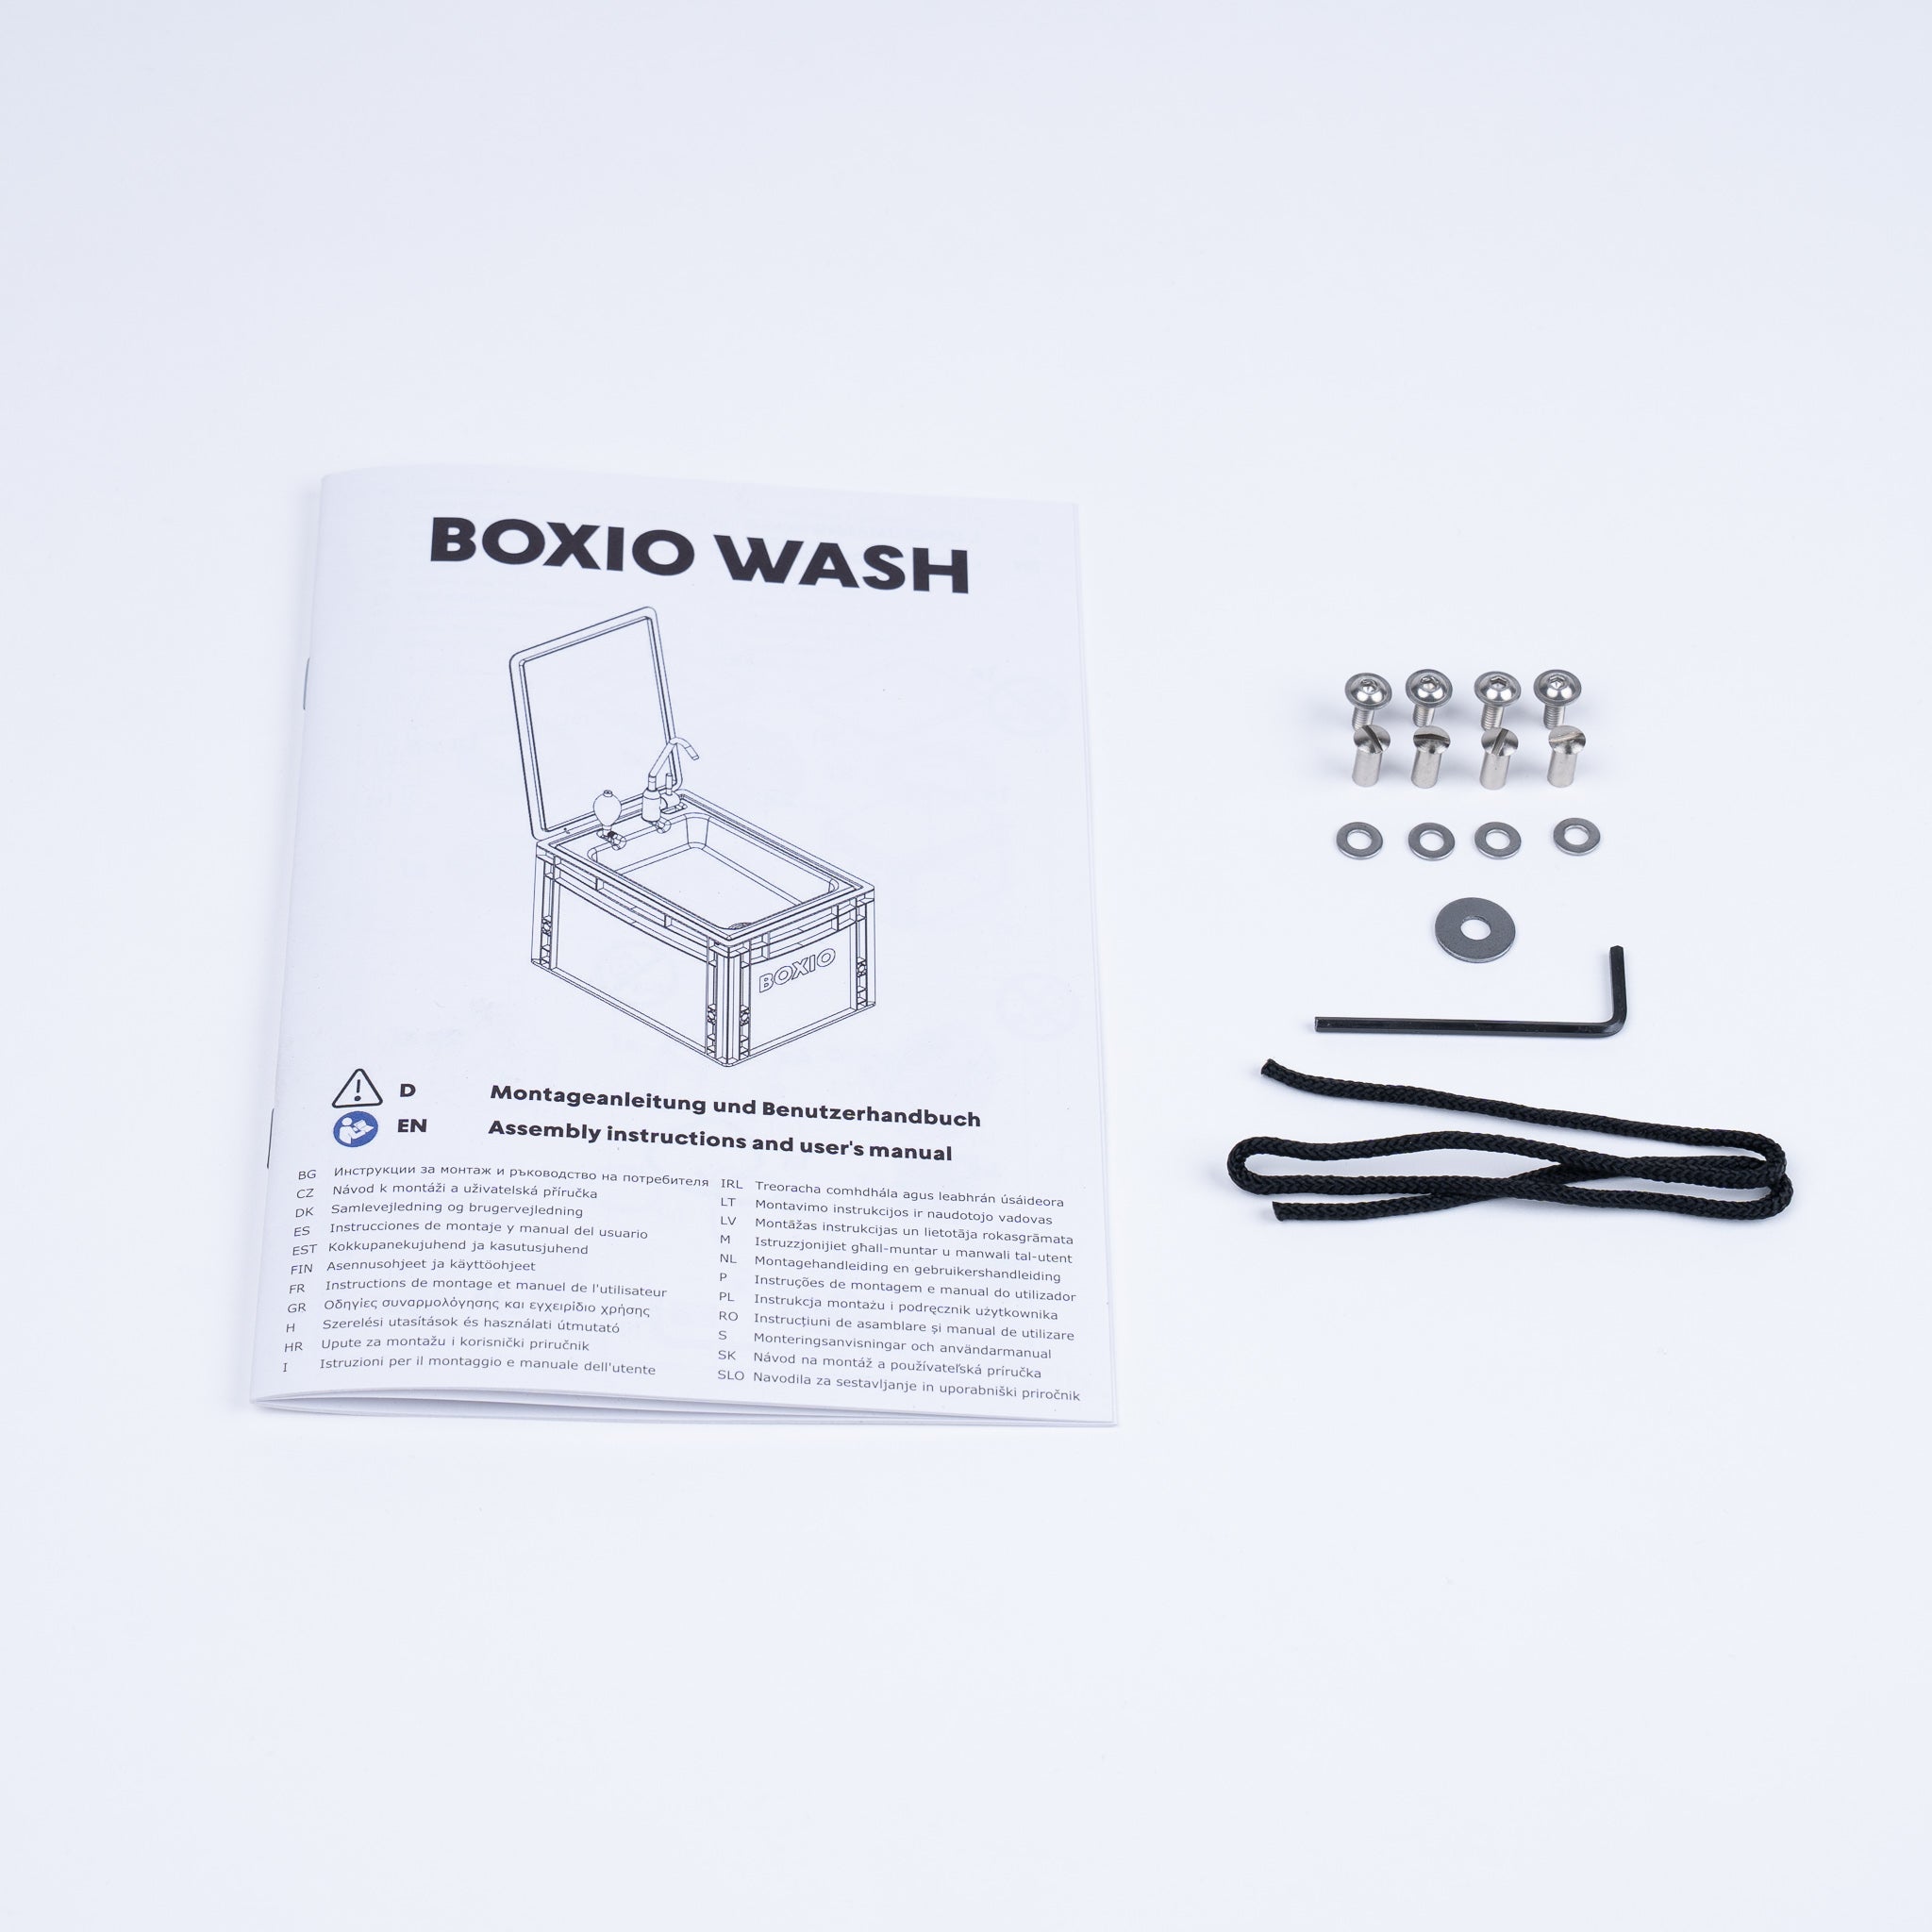 Assembly set (WM 1) for BOXIO - WASH